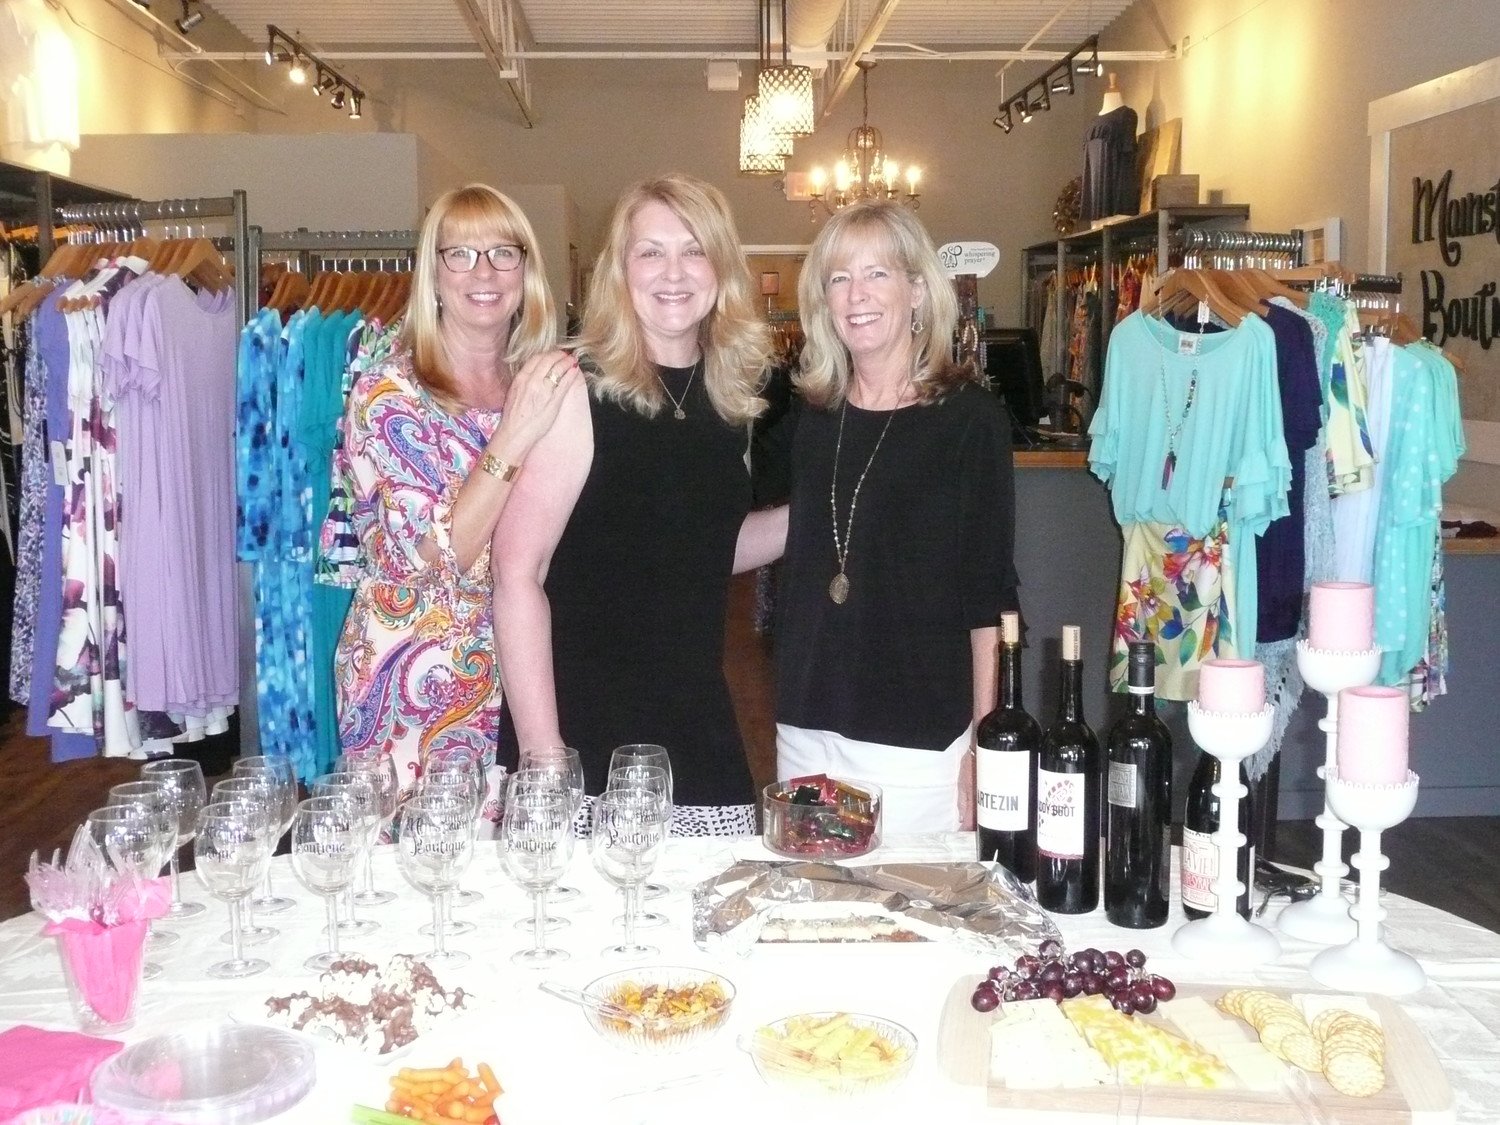 Kimberly Pacetti, Mainstream Boutique owner Carla Miles and Christine Smith gather at Mainstream Boutique’s second anniversary celebration last Friday, April 13. The event offered attendees the opportunity to drink wine, eat hors d’oeuvres and take home giveaways provided by New York Butcher Shoppe, Ruth's Chris Steak House, Beach Diner, Mary Kaye Consultant Trudy Toche, BellaVi Nail Spa and the Ponte Vedra Recorder. All weekend, the business offered 15 percent off to customers to celebrate the occasion.